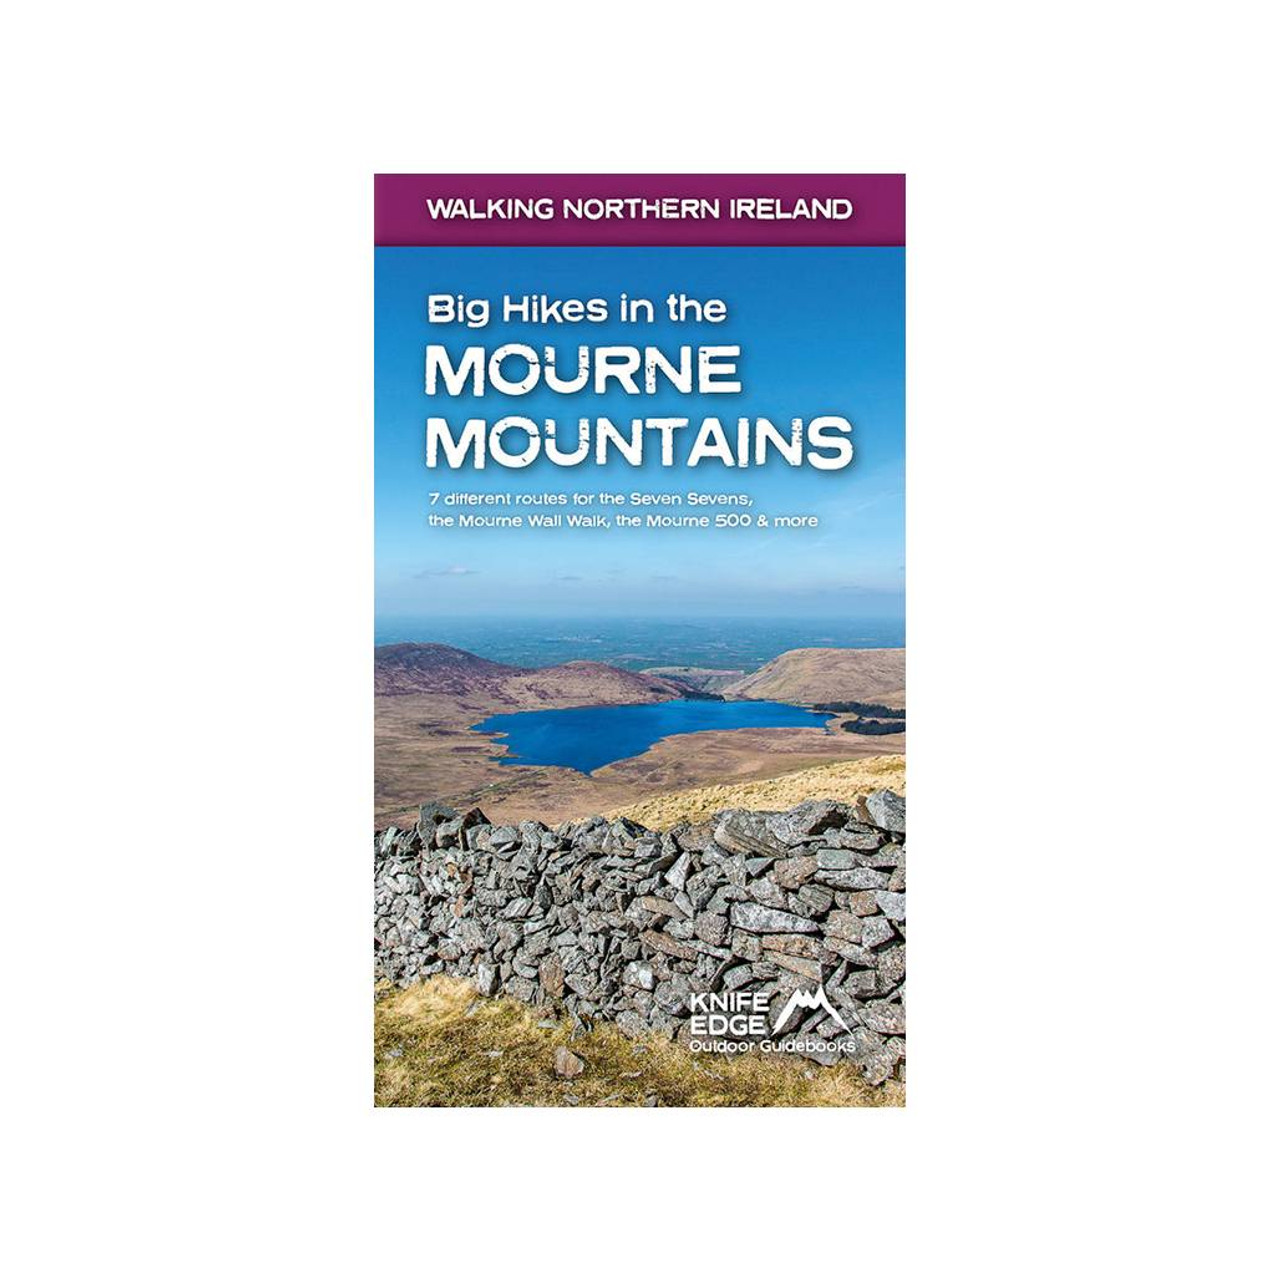 Big Hikes In The Mourne Mountains - Walking Northern Ireland